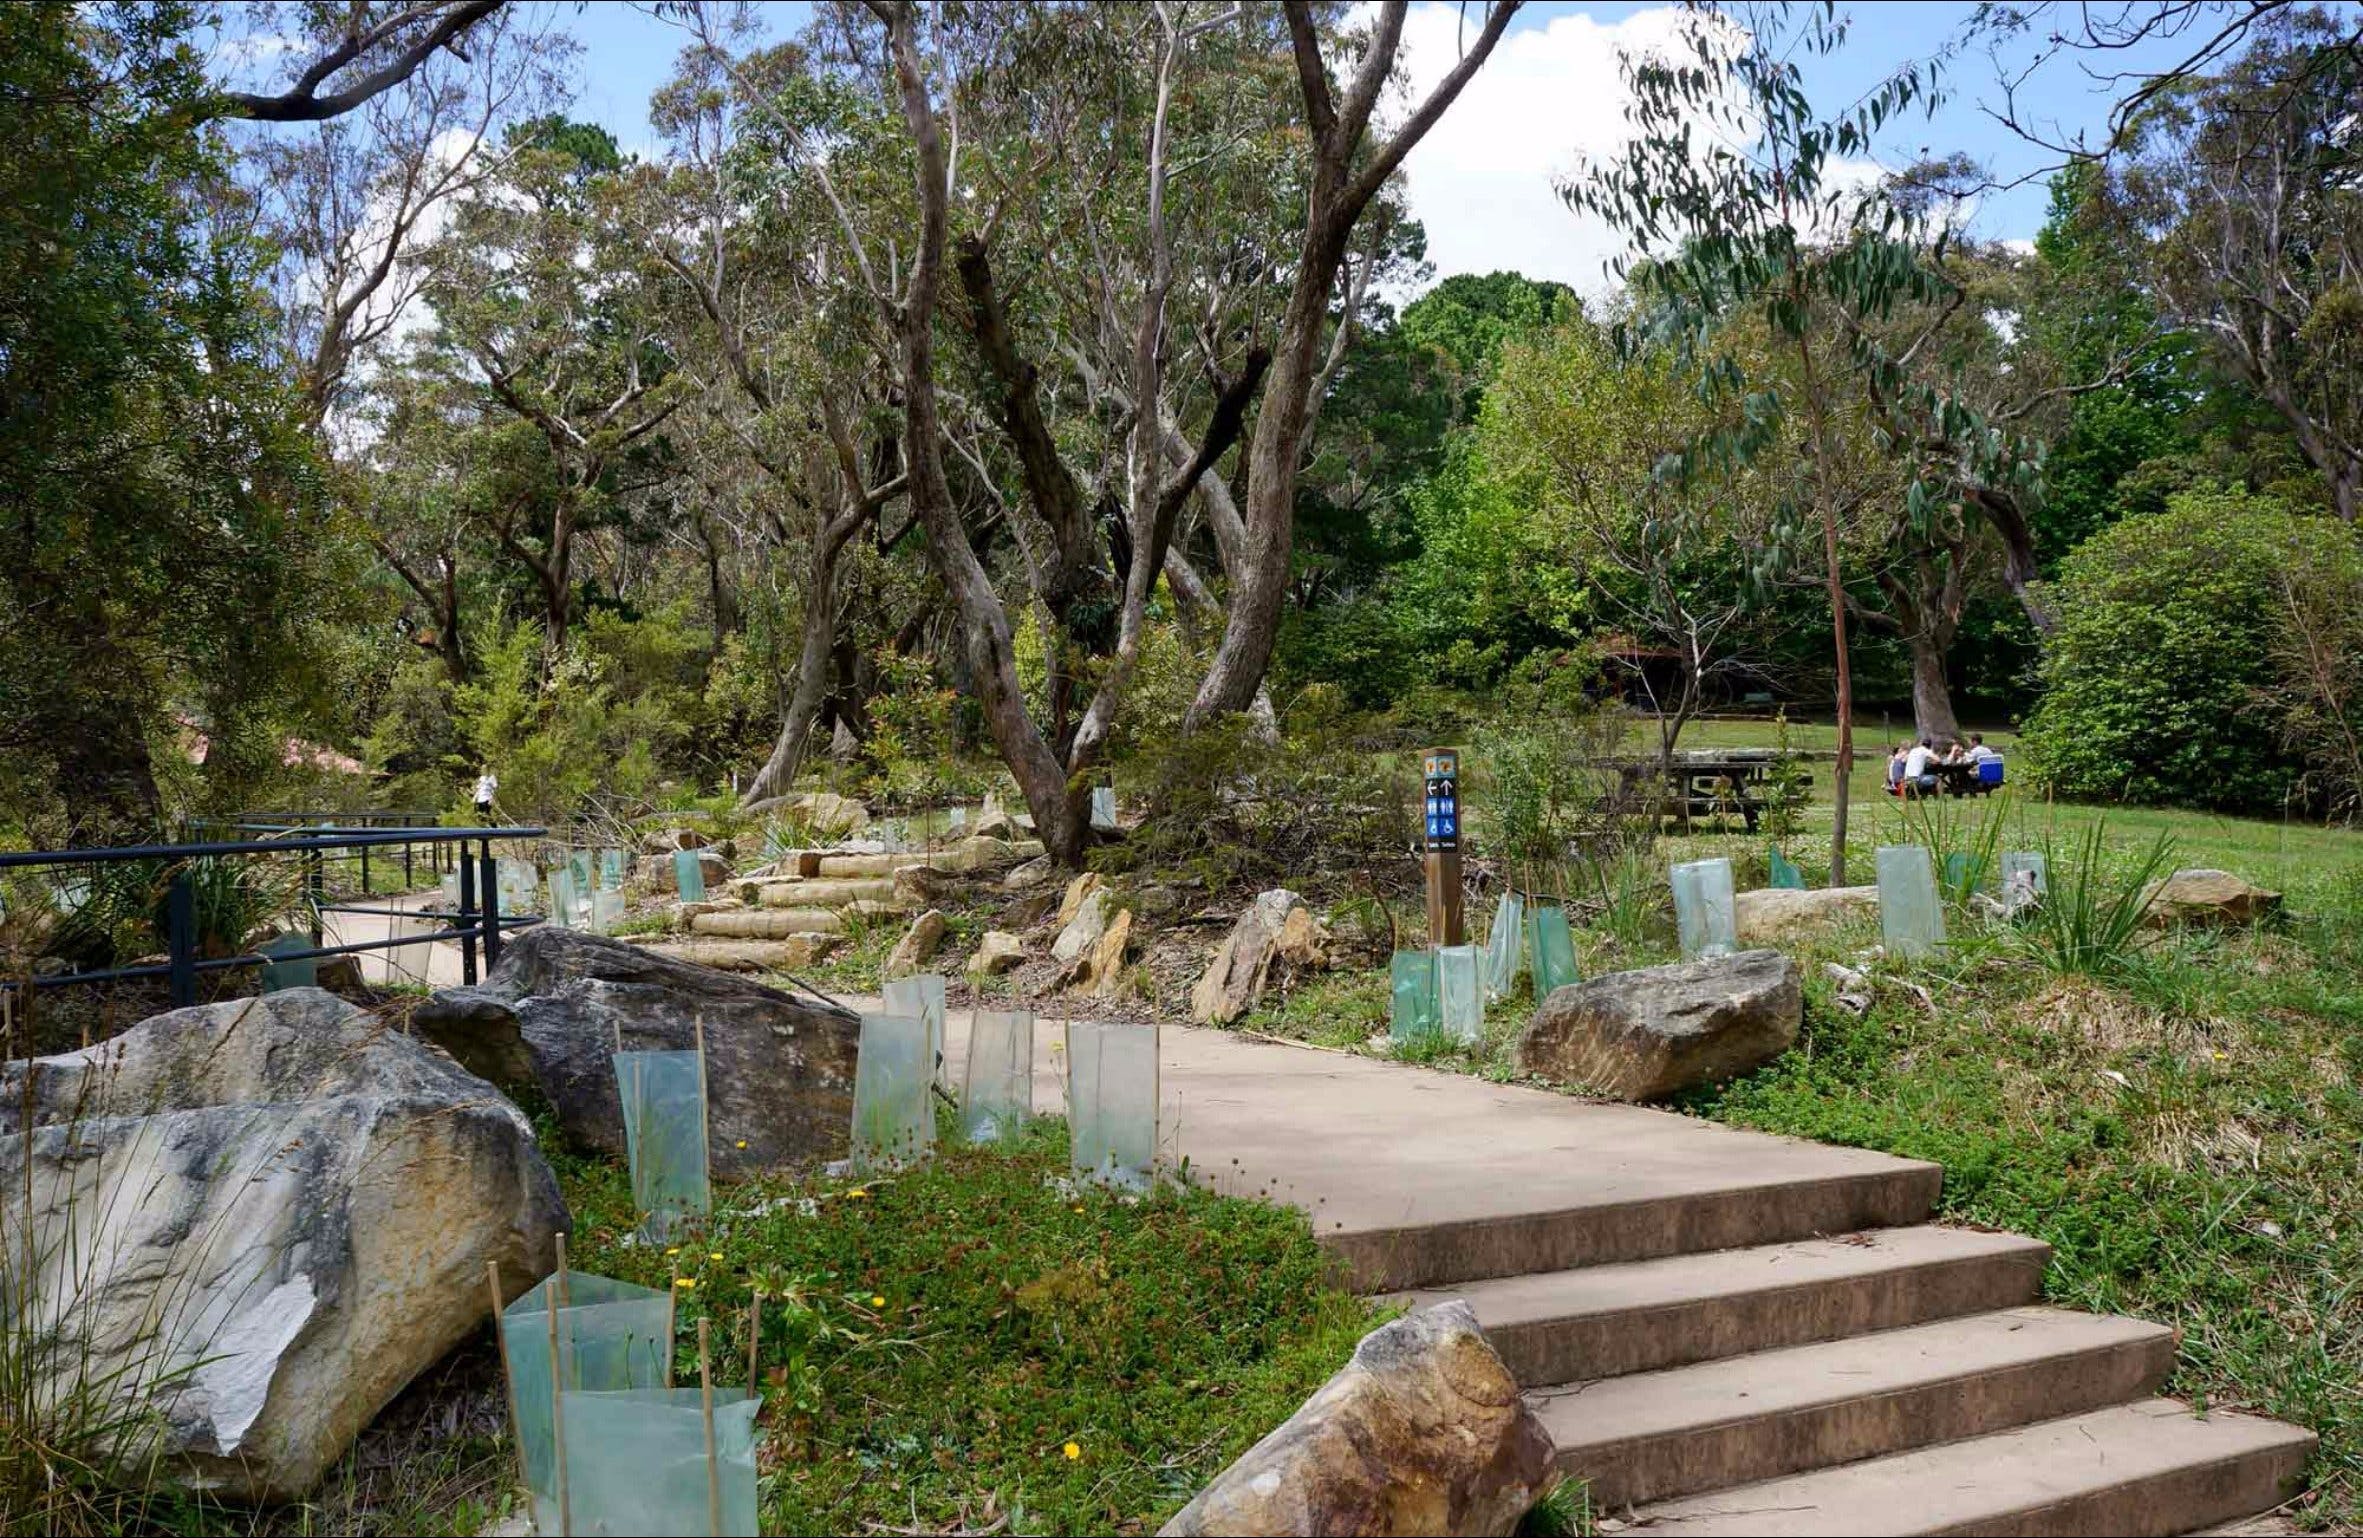 Wentworth Falls picnic area - Find Attractions